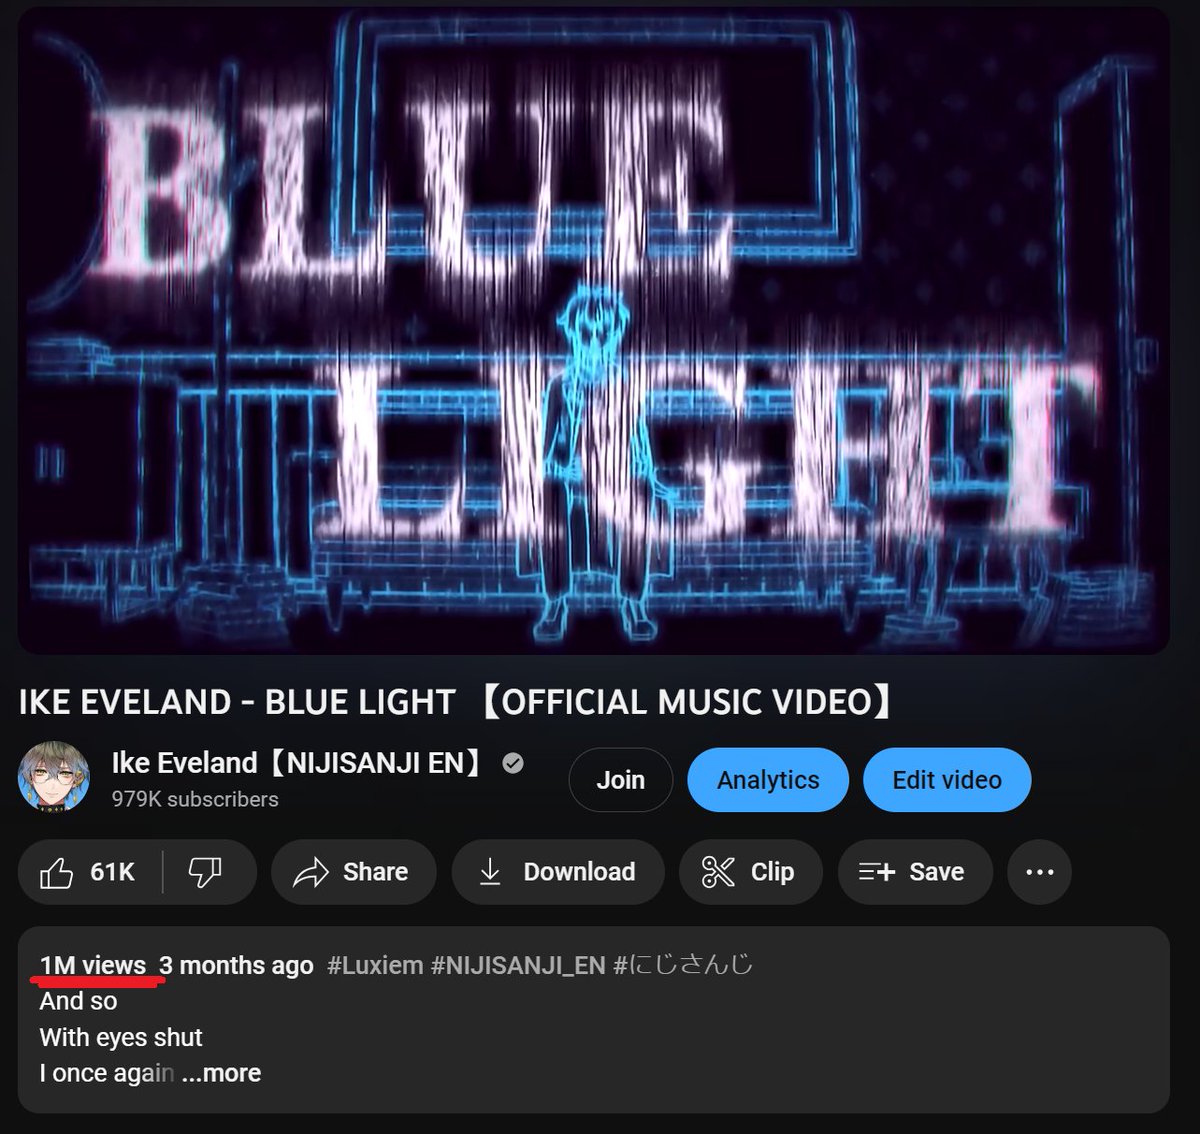 Ahhhh thank you all so much for 1 million views on Blue Light!! It's unbelievable that a song I made has been seen by so many people.. I'm so happy! 🥹